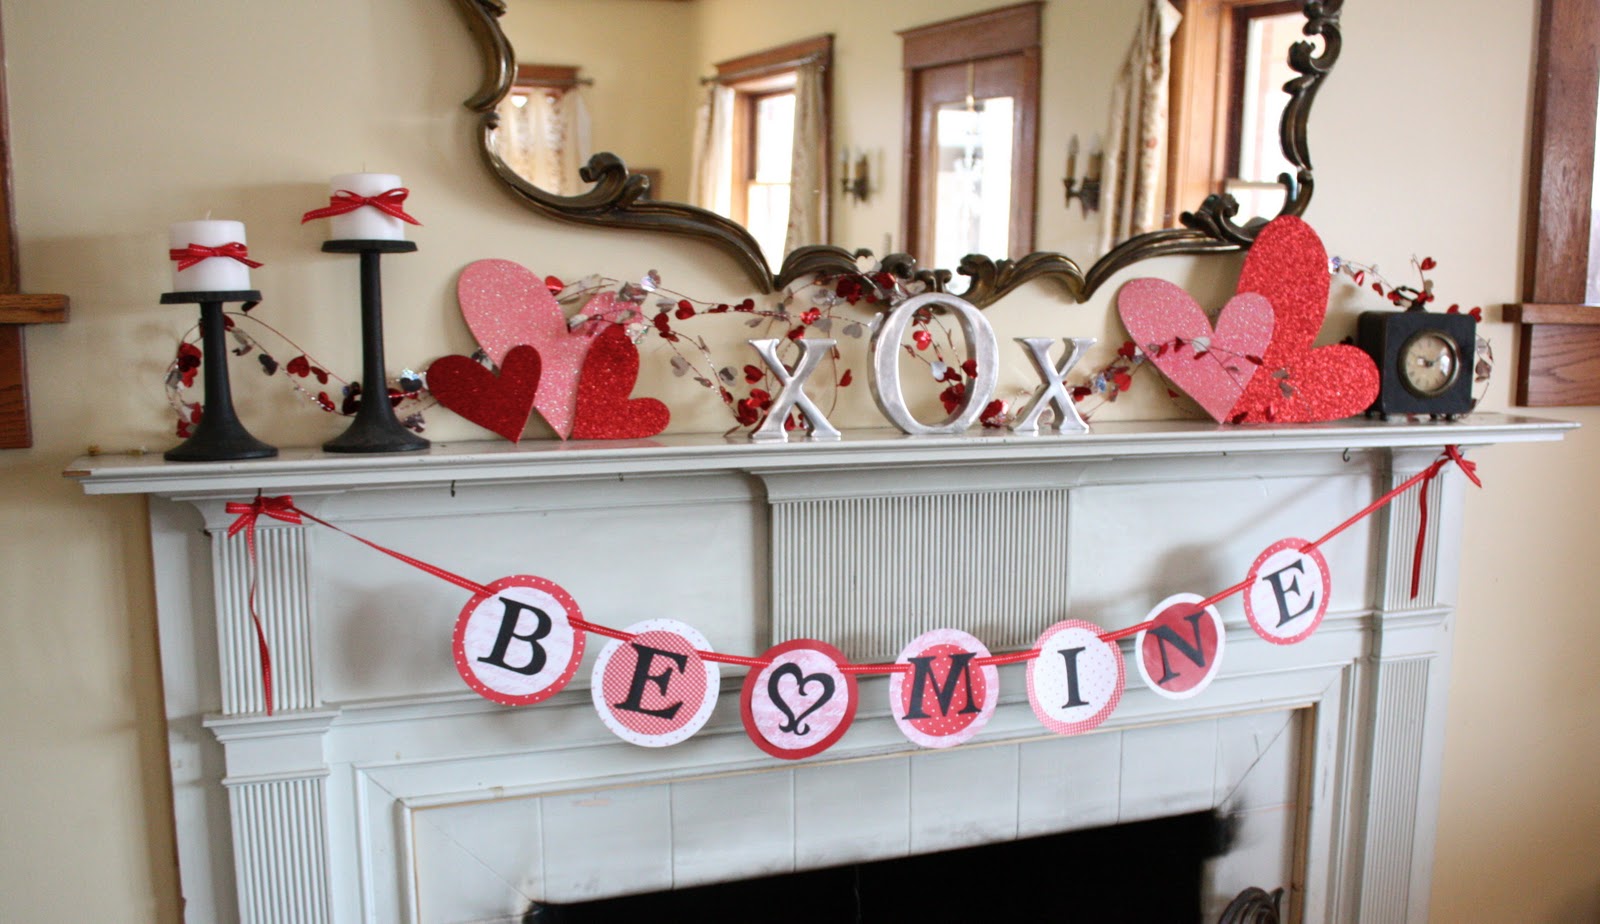 4. Valentine's Day Decorations Ideas 2014 To Decorate Bedroom,office And House